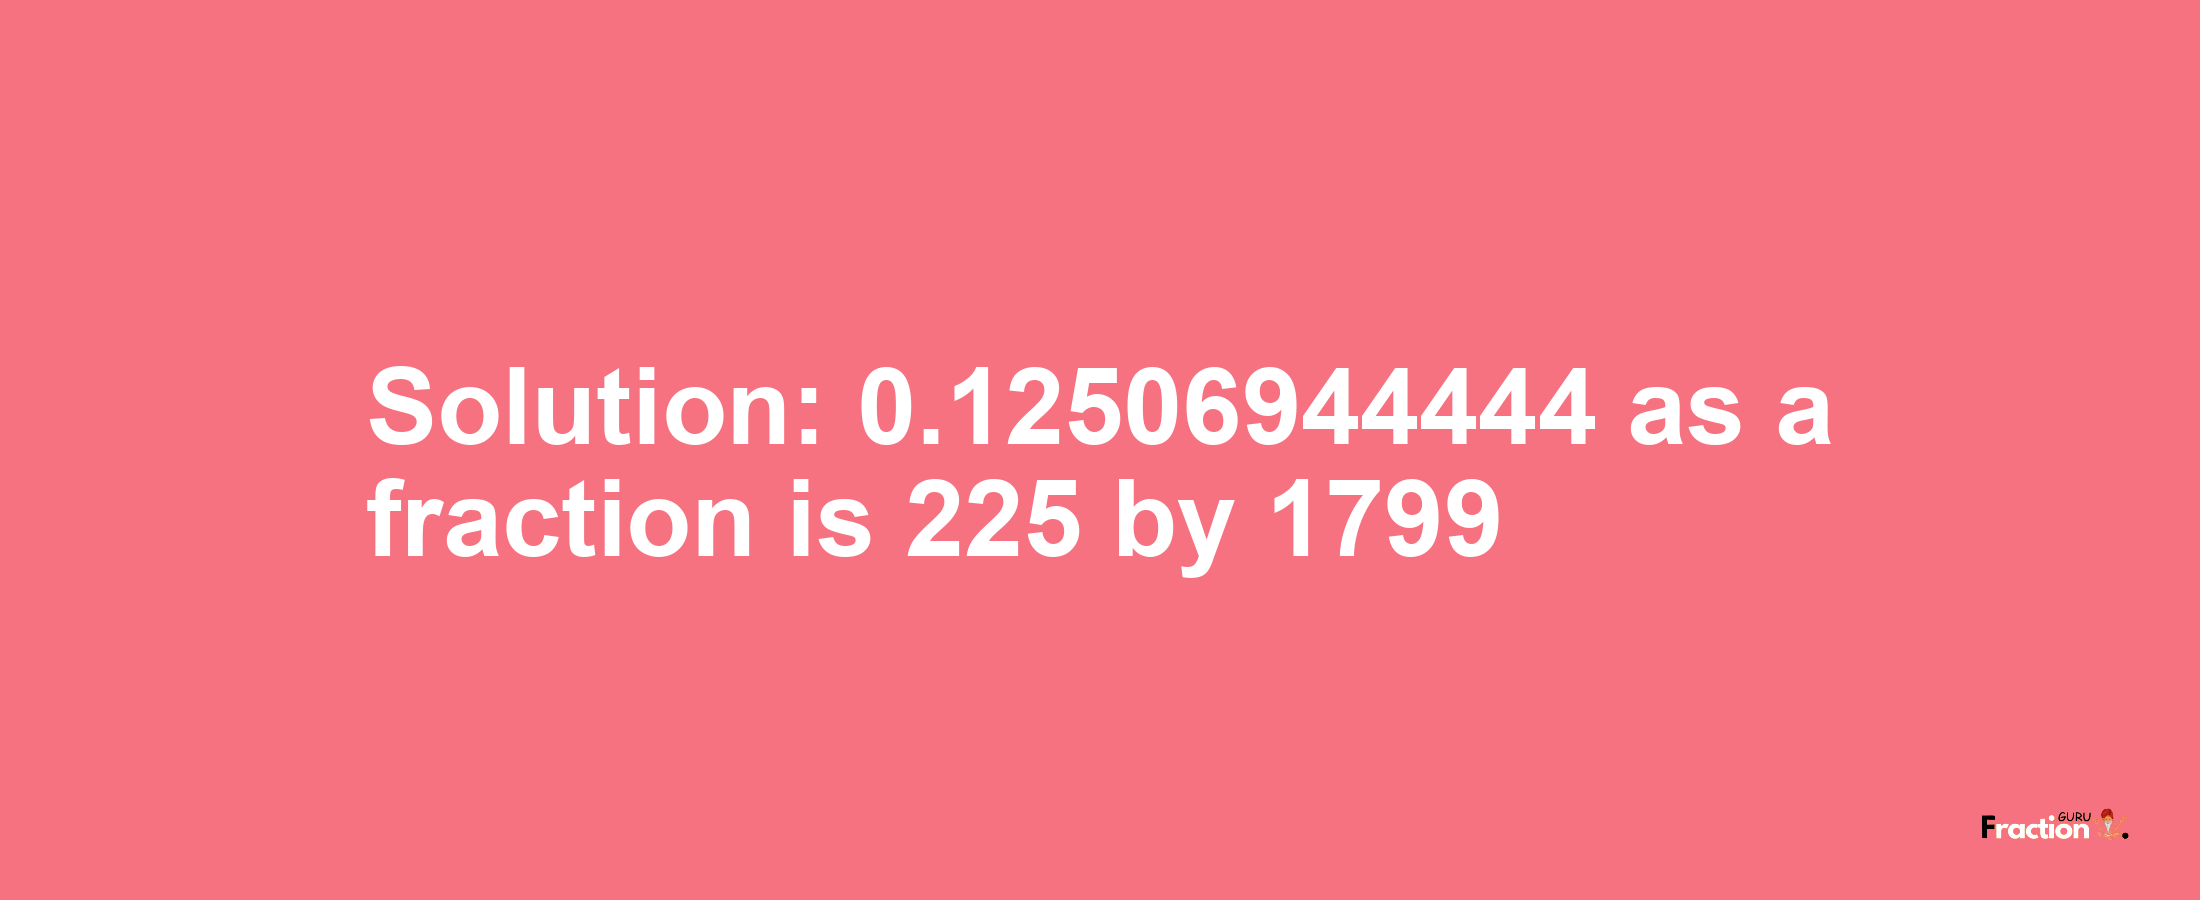 Solution:0.12506944444 as a fraction is 225/1799